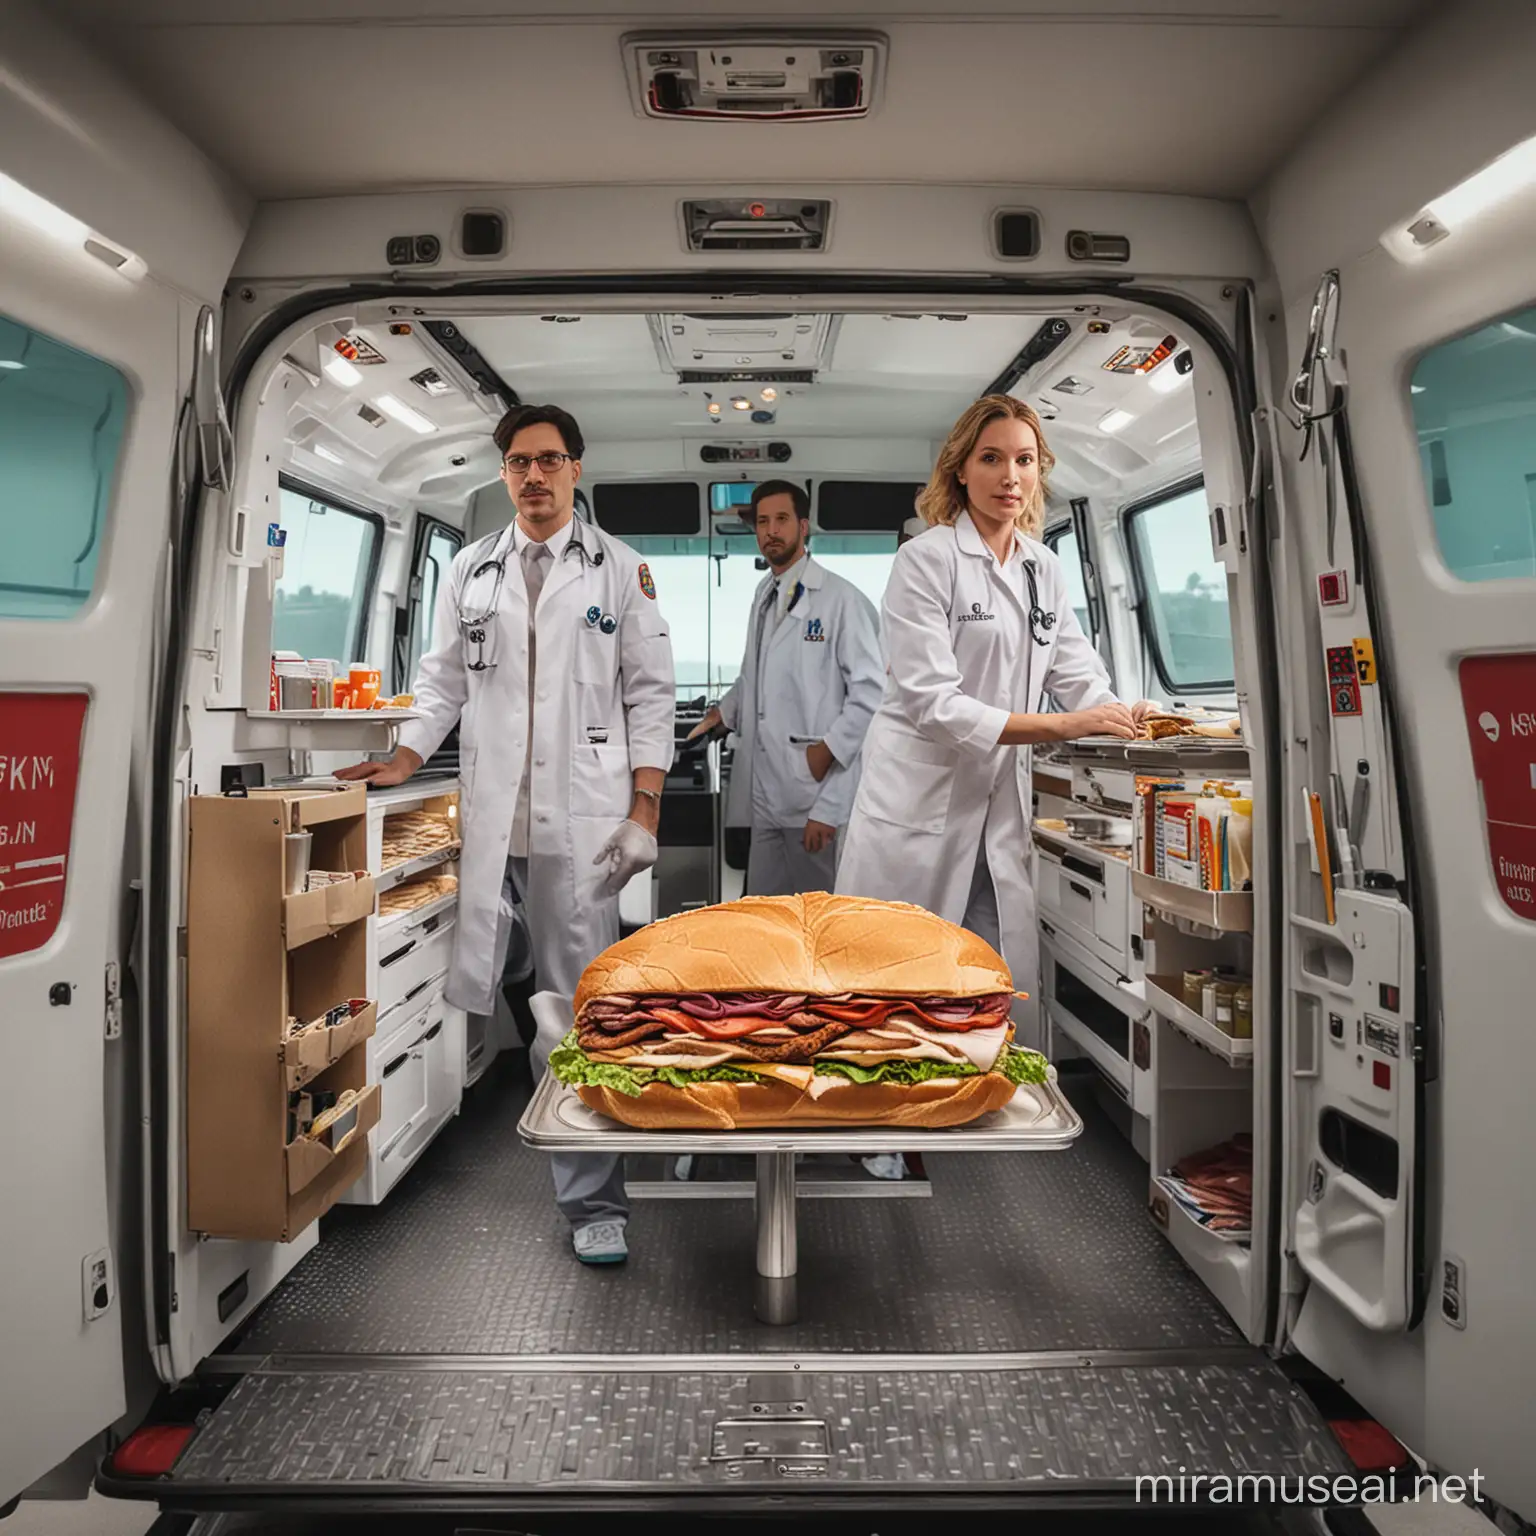 create a realistic image of emergency medicine physicians inside of an ambulance with a turkey sandwich on the gurney instead of a patient.